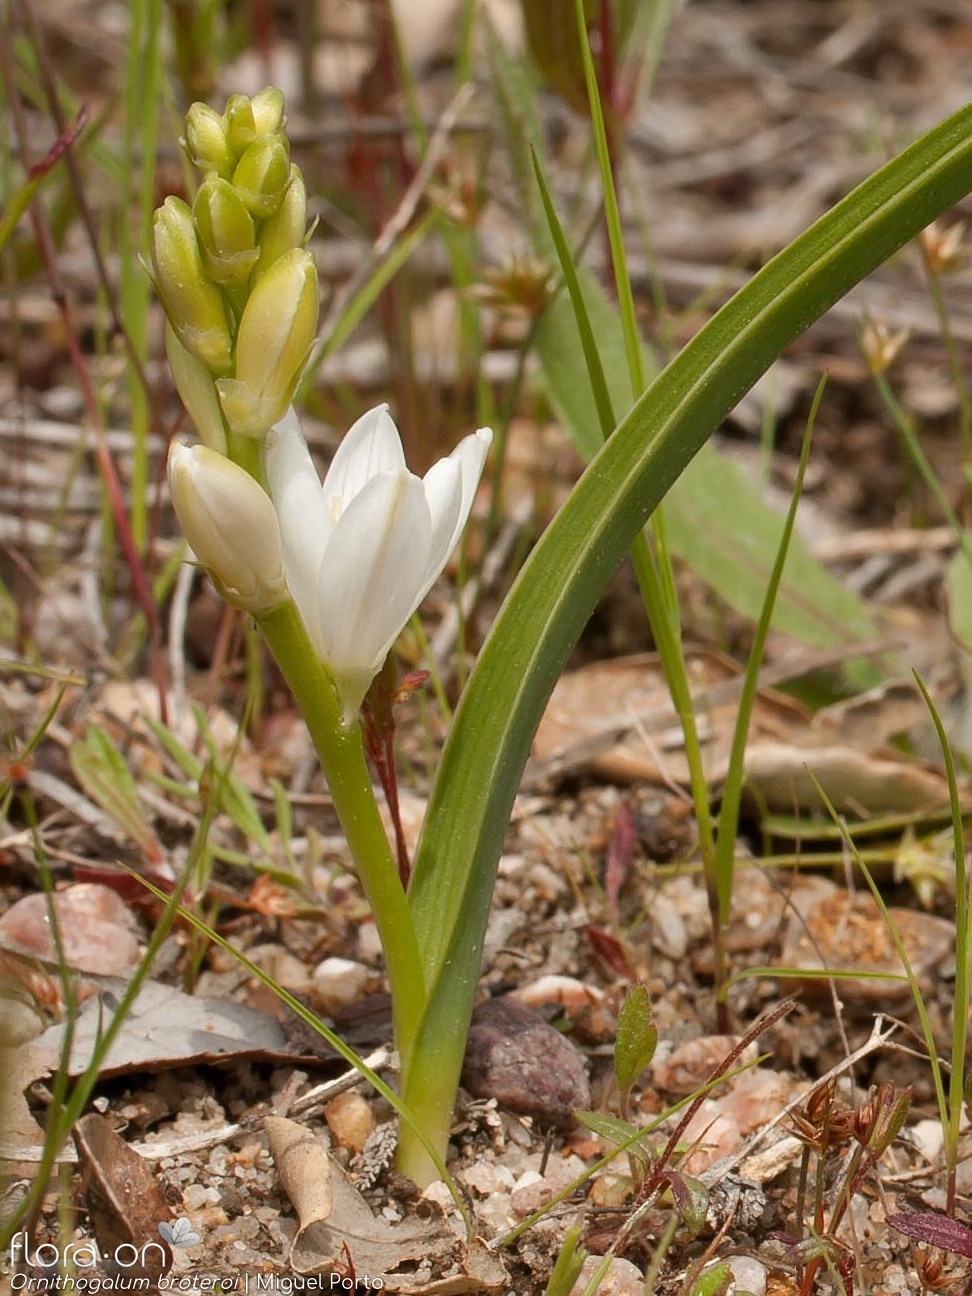 Ornithogalum broteroi - Flor (geral) | Miguel Porto; CC BY-NC 4.0